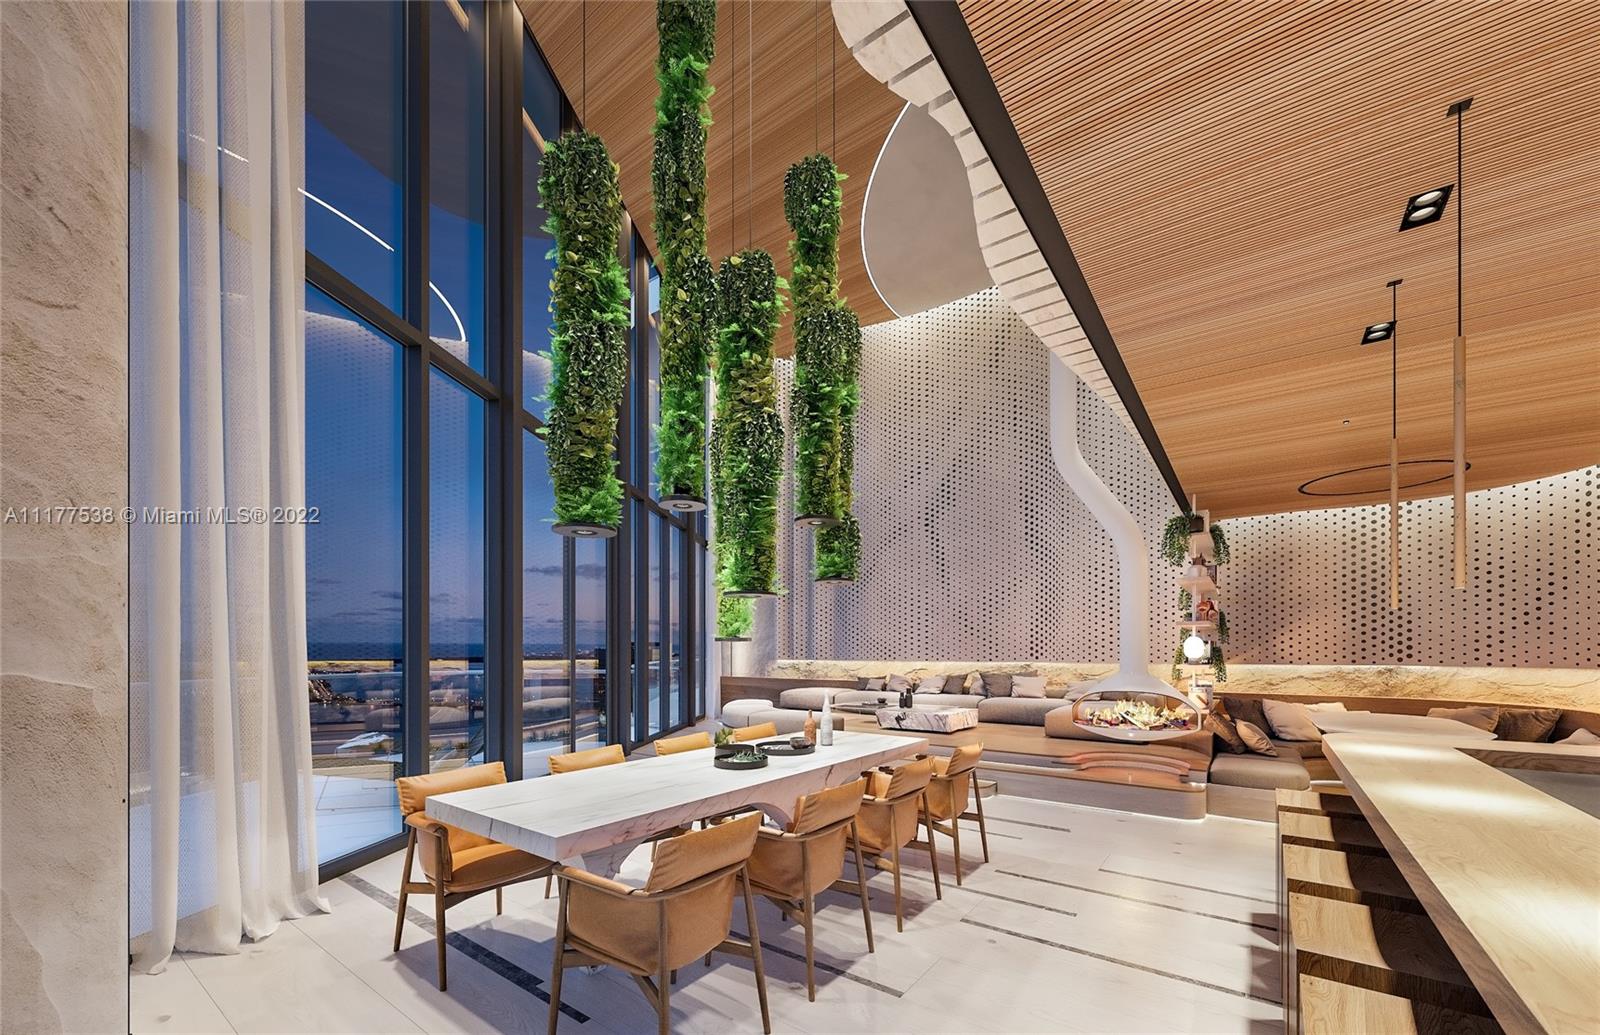 A sky penthouse unlike anything you’ve ever imagined. This private sky oasis features 7,855 SF of interior living & 2,787 SF of exterior living, 6BD,7+2BR complete w/a private rooftop sky lounge/pool. Revel in panoramic views of Biscayne Bay from this designer-ready PH at the coveted Brickell Flatiron. Design your dream PH or utilize the interior concept envisioned by Doo Architecture. Experience the pinnacle of sophisticated modern design w/ specialty lighting, top-of-the-line Gaggenau appliances, elevator, expansive principal suite made for royalty & a custom fireplace. Generous open-concept living spaces & floor-to-ceiling windows & doors accent artfully filtered natural light. Enjoy unparalleled resort-style amenities including a spa, gym, theater & lap pool, personal concierge & valet